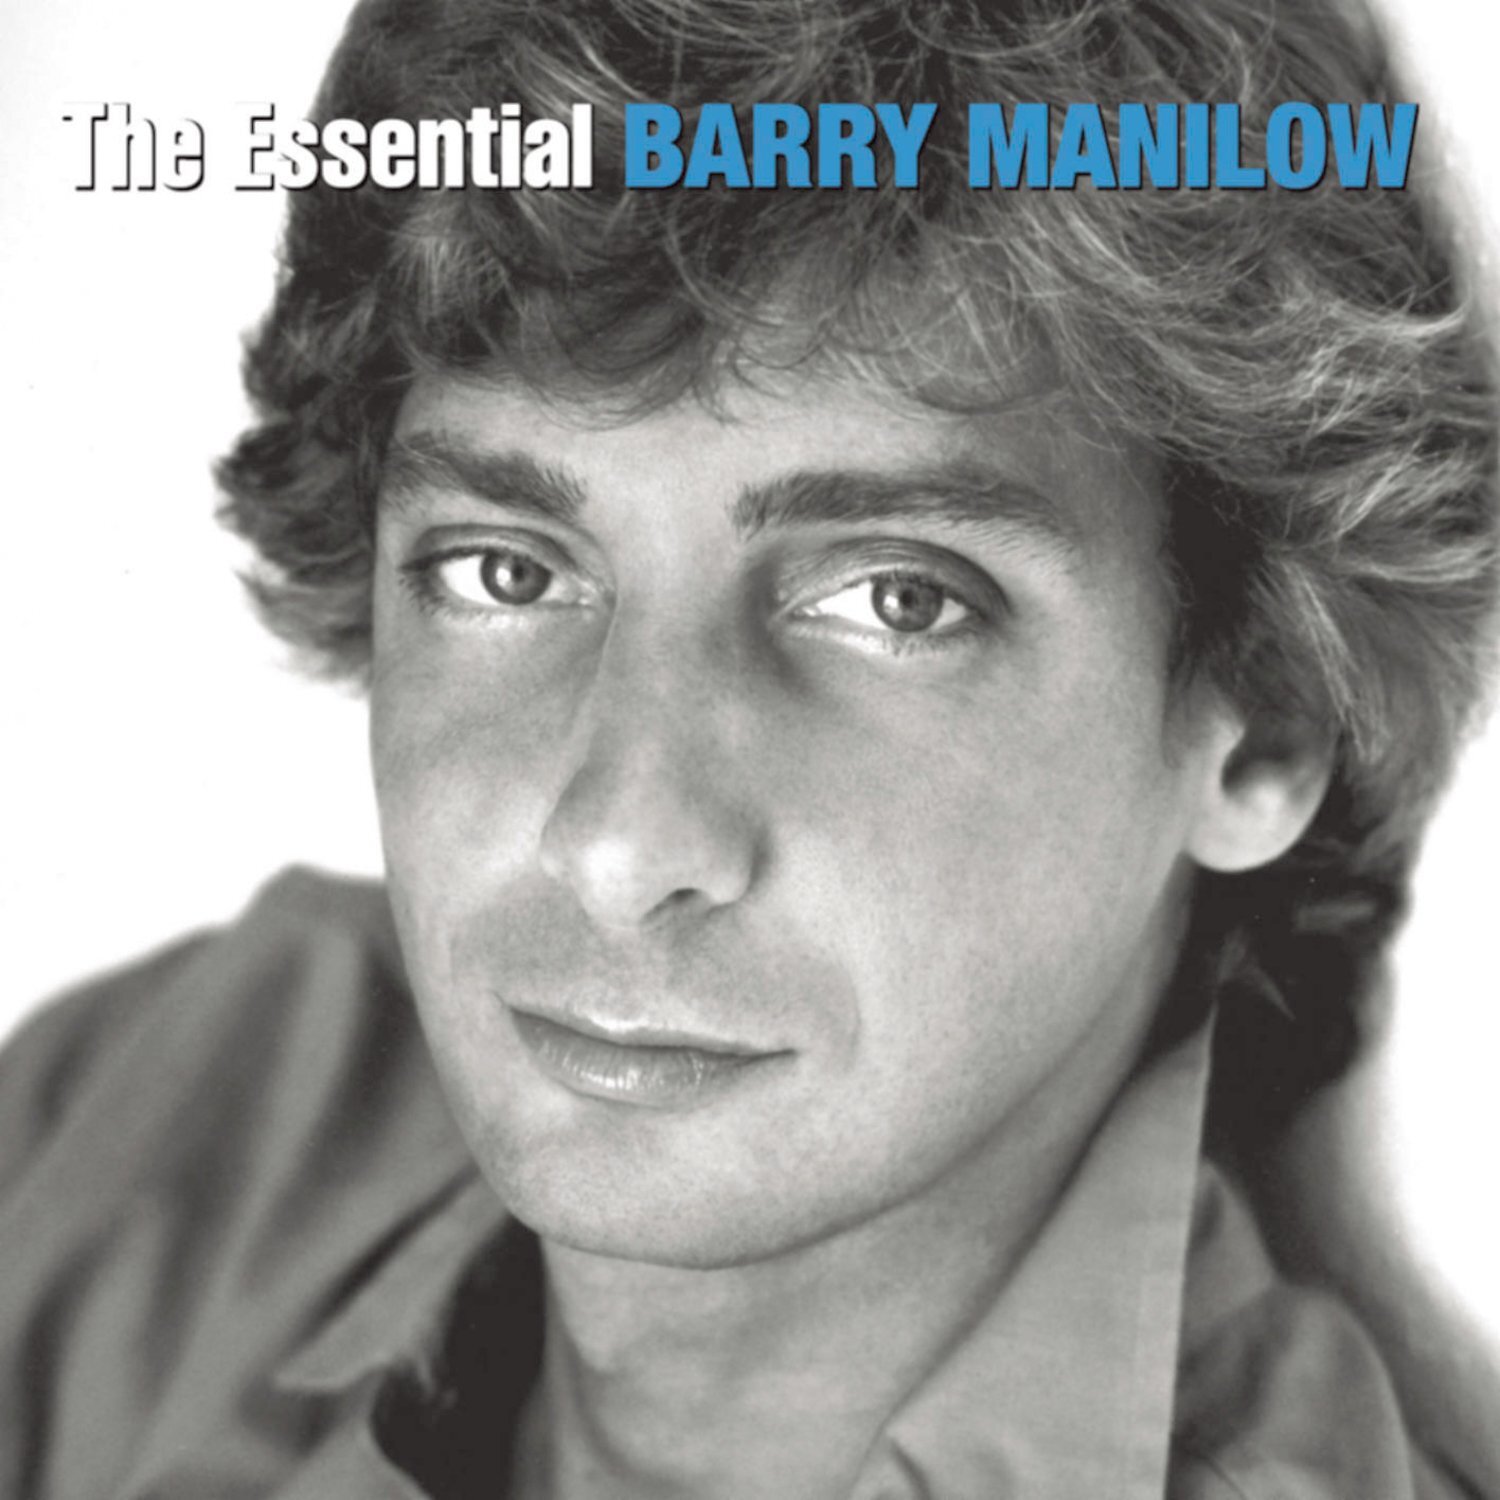 (44) The Essential Barry Manilow - Barry Manilow.jpg